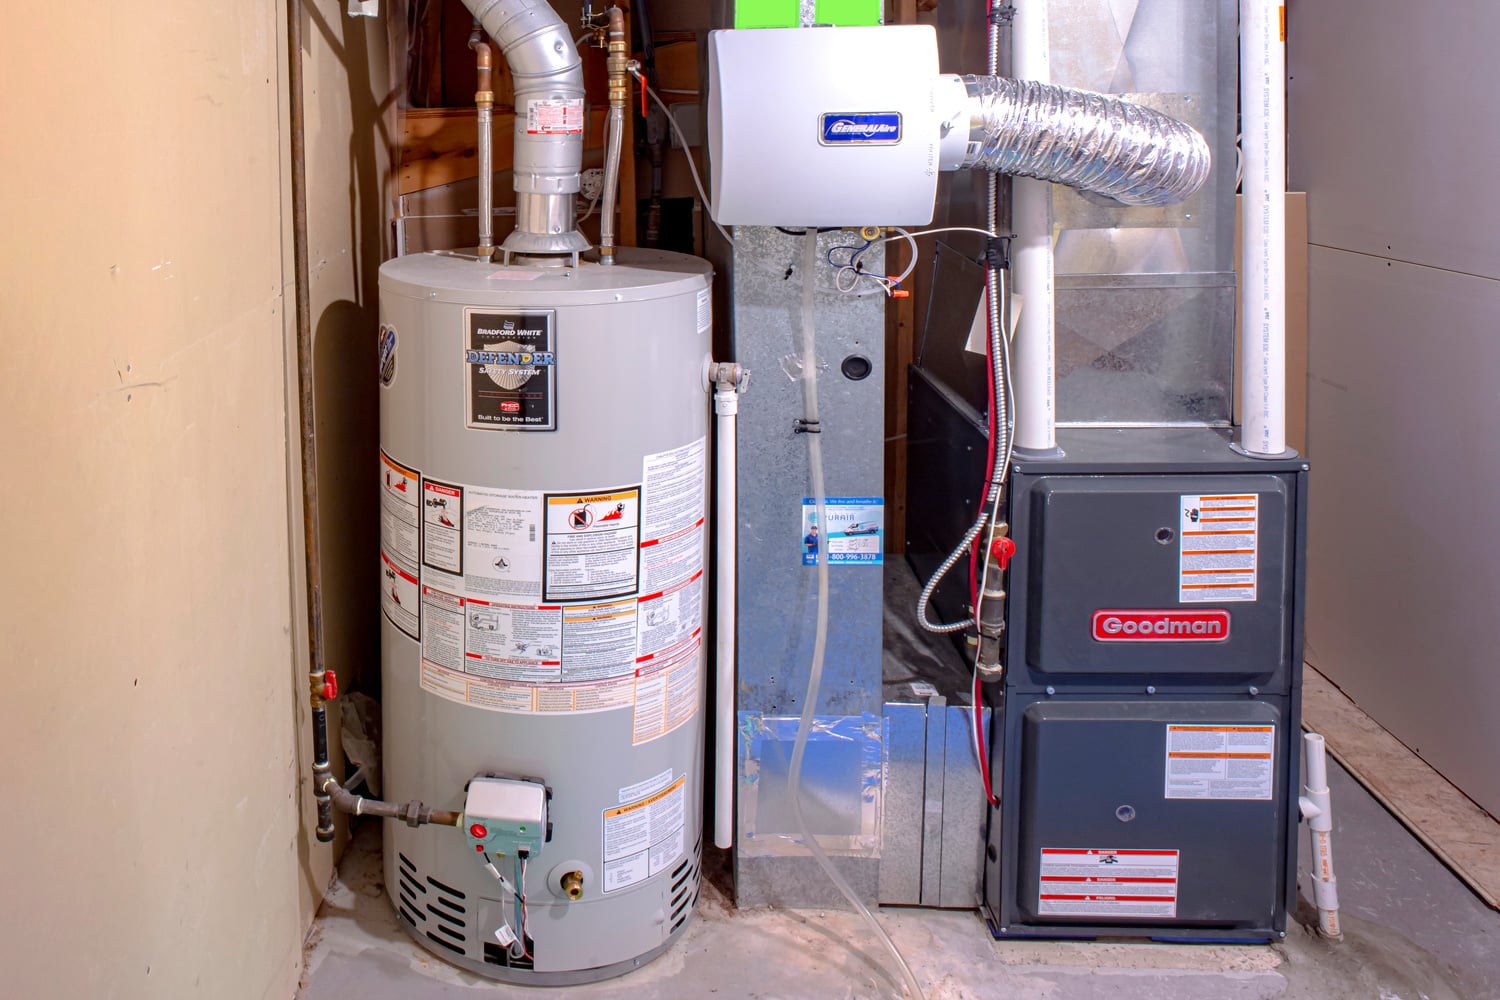 A home Goodman high efficiency furnace with Bradford White Residential gas water heater & an Generalaire humidifier.